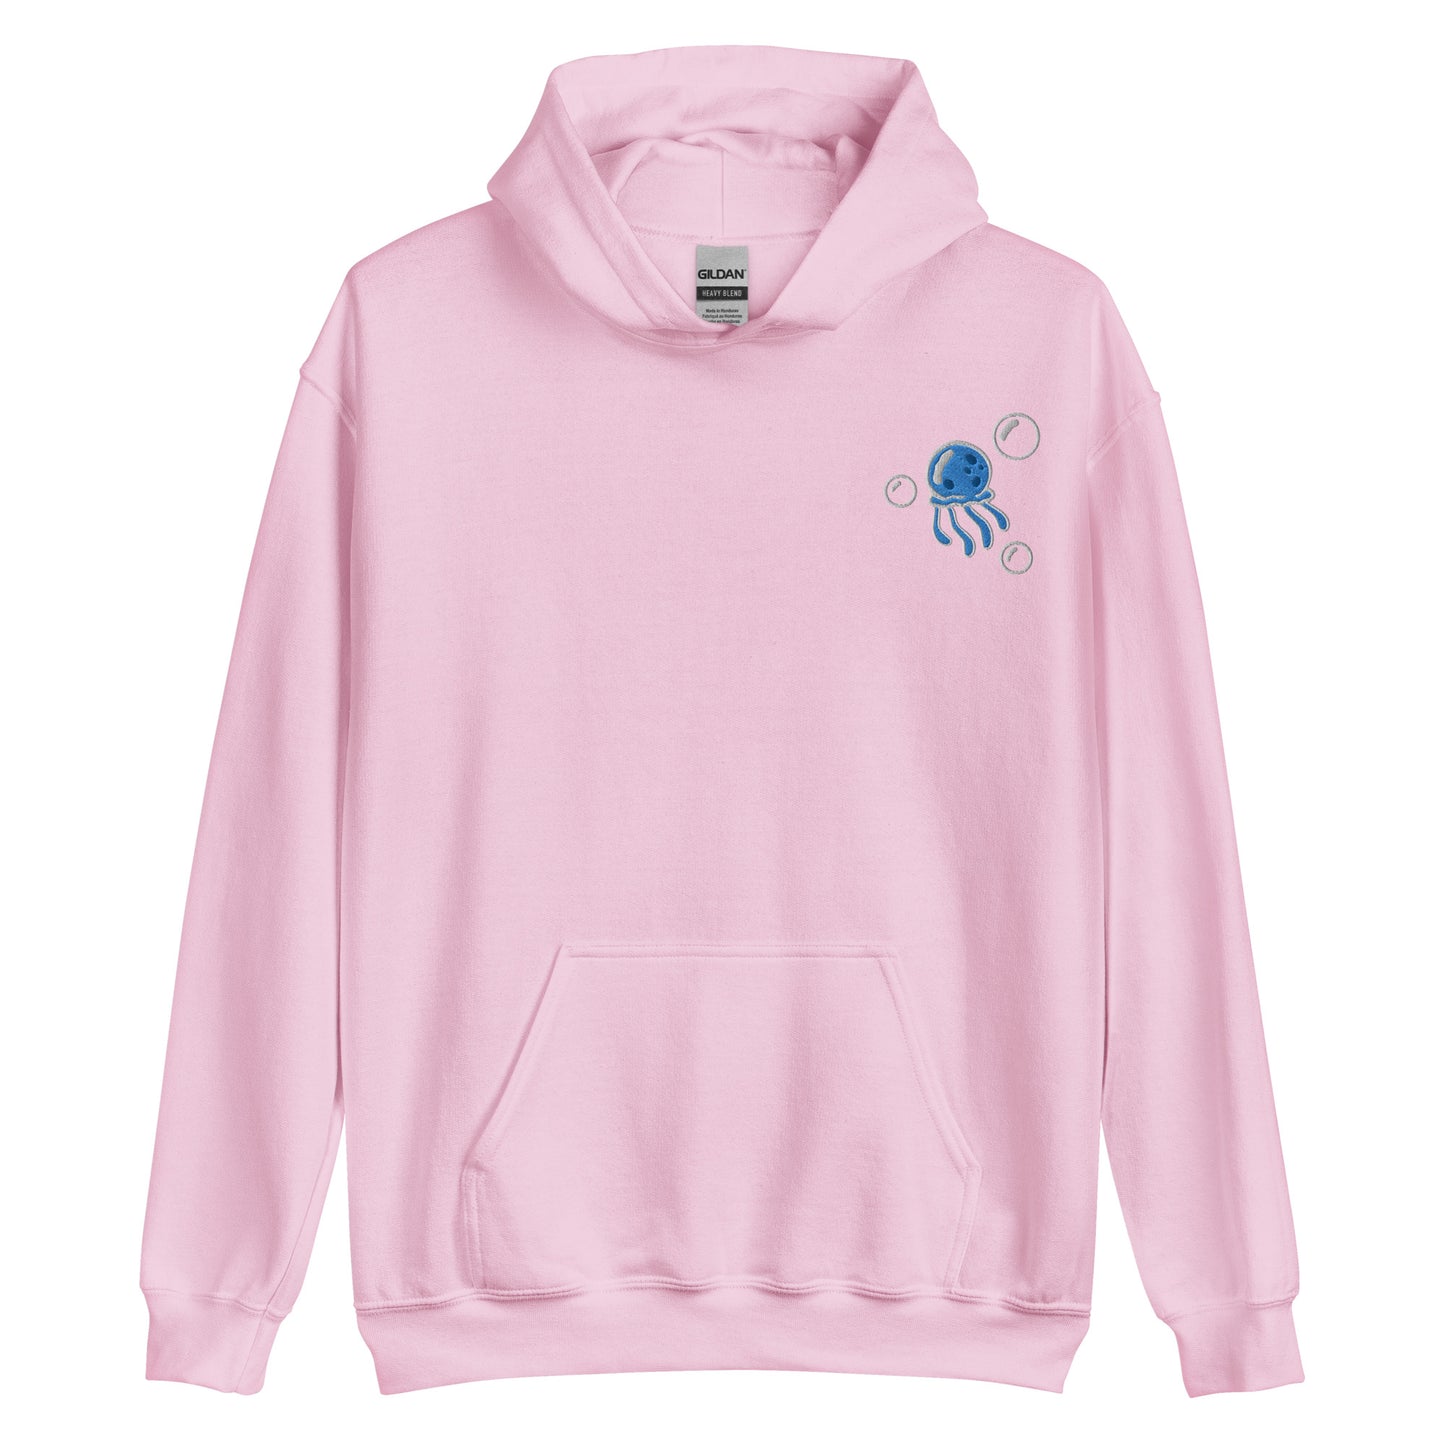 Jellyfish BLUE embroidered pullover hoodie